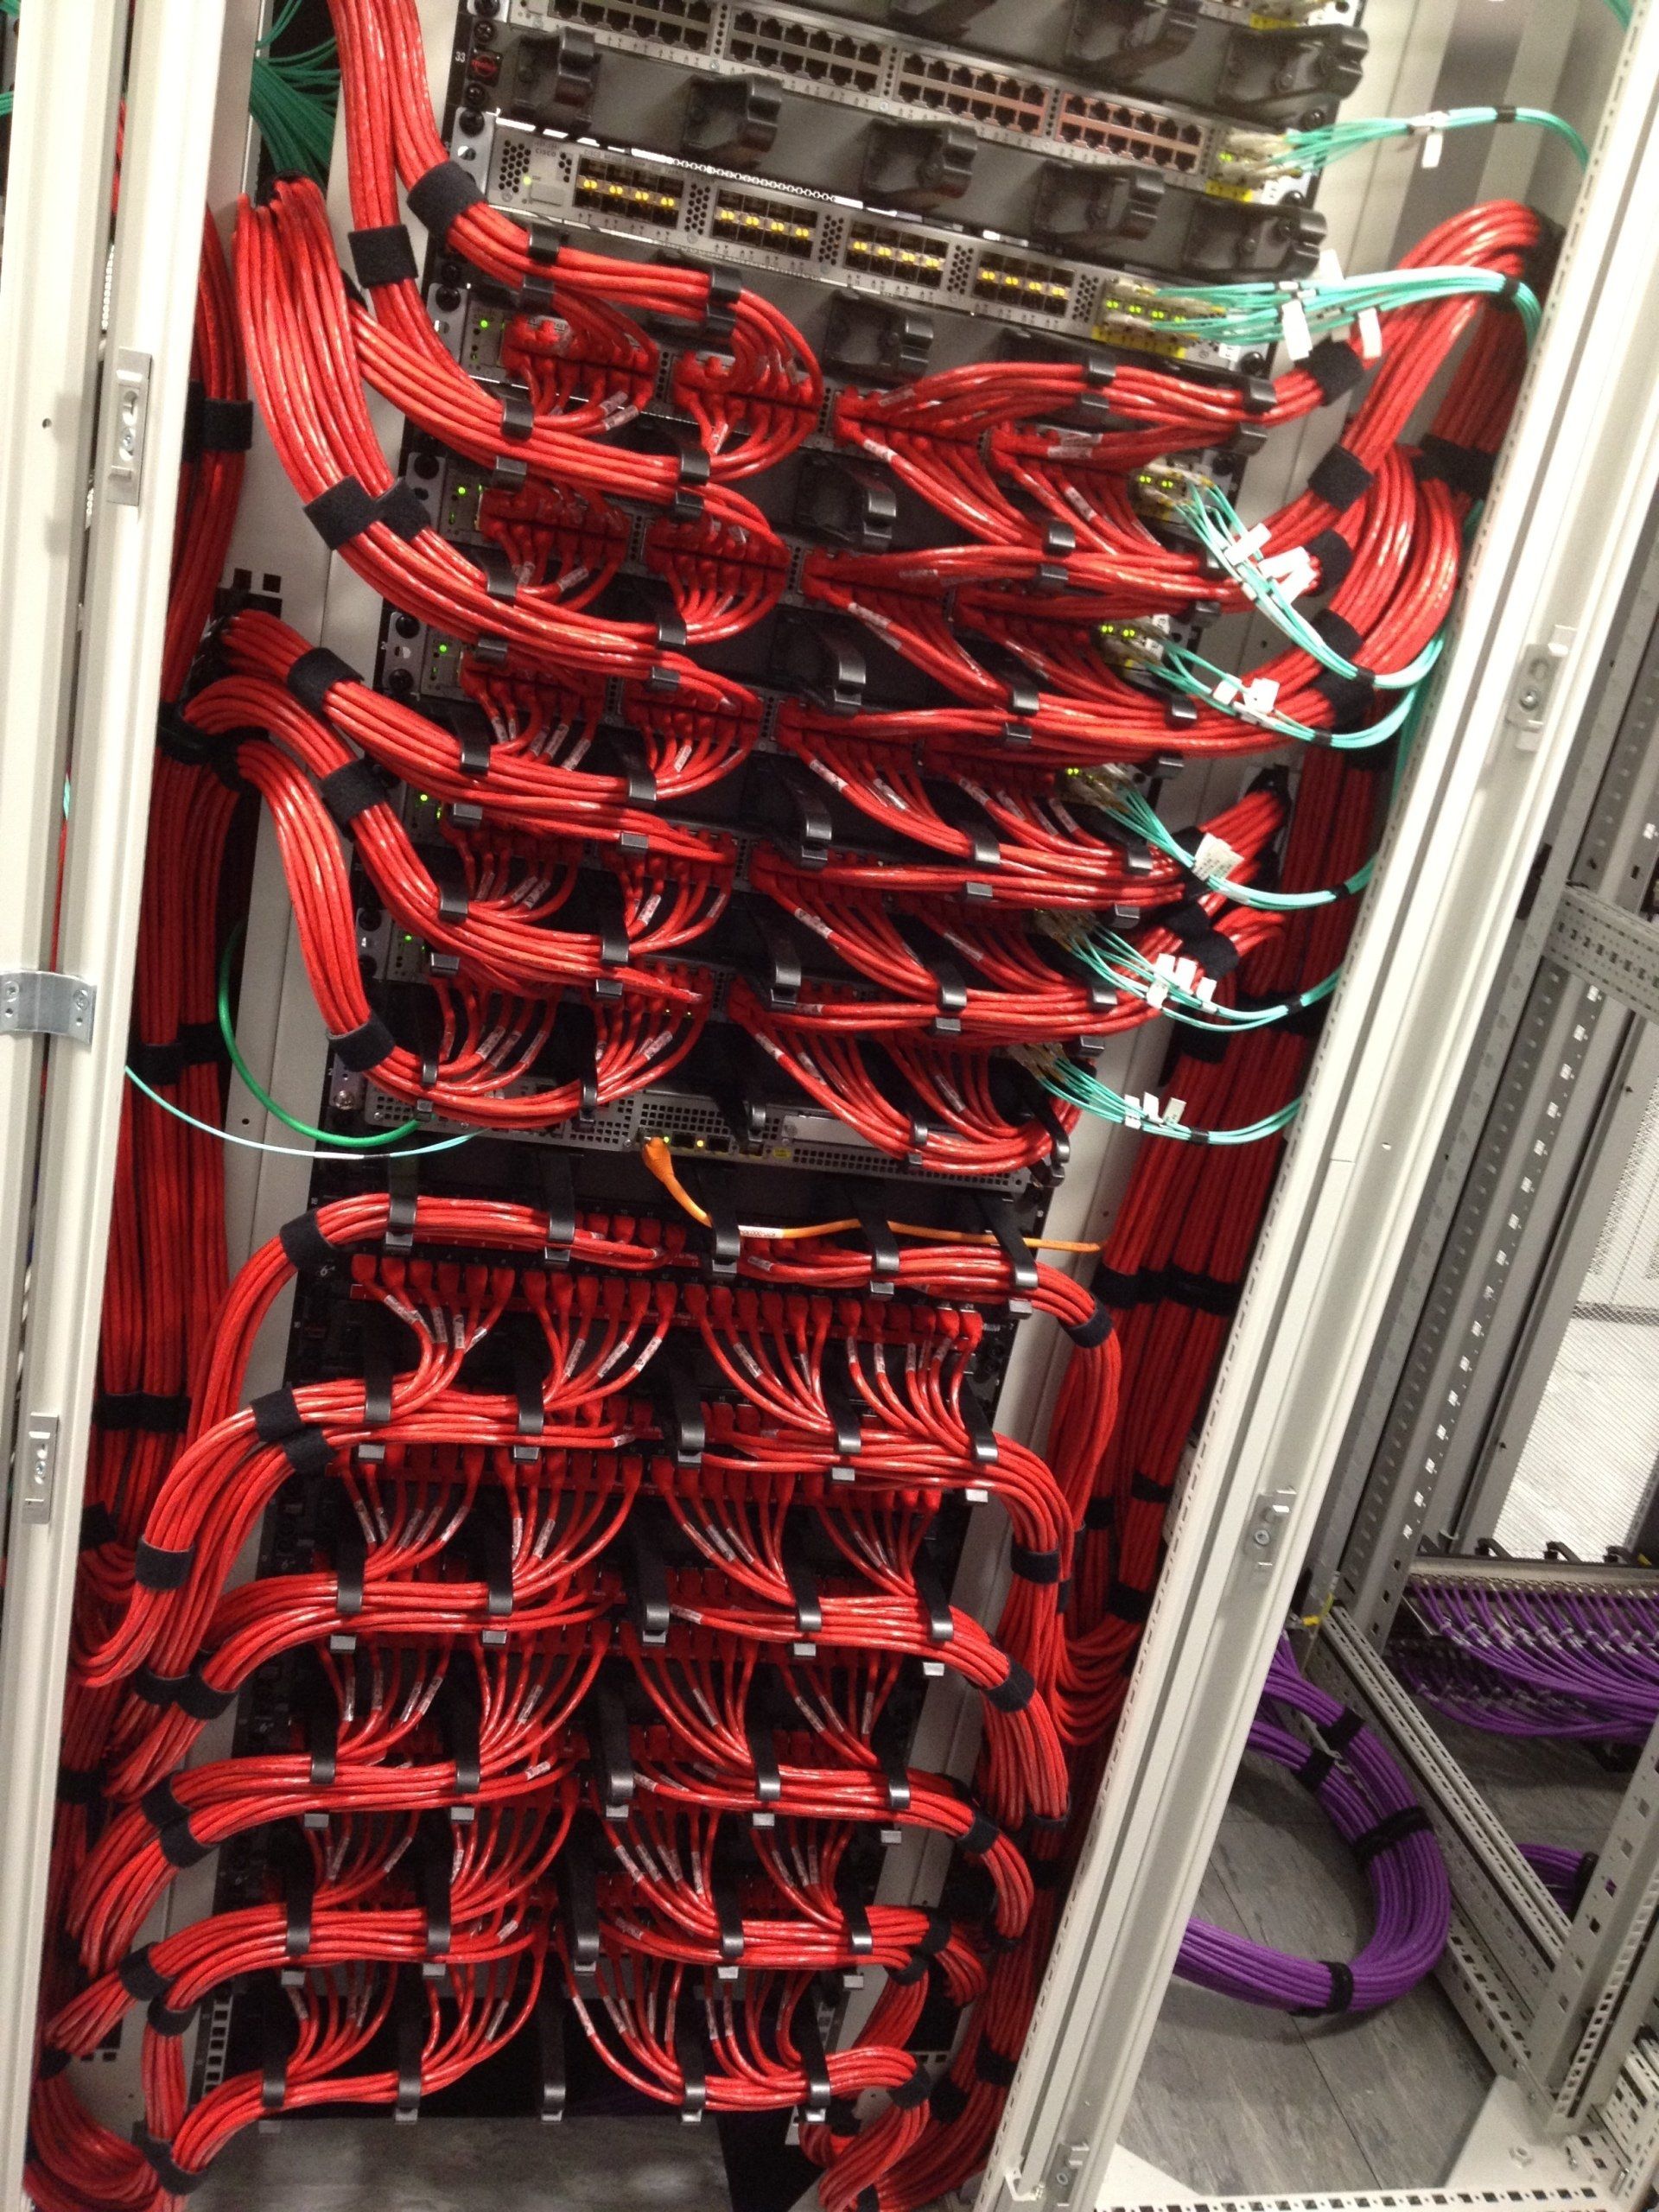 lots of red server cables